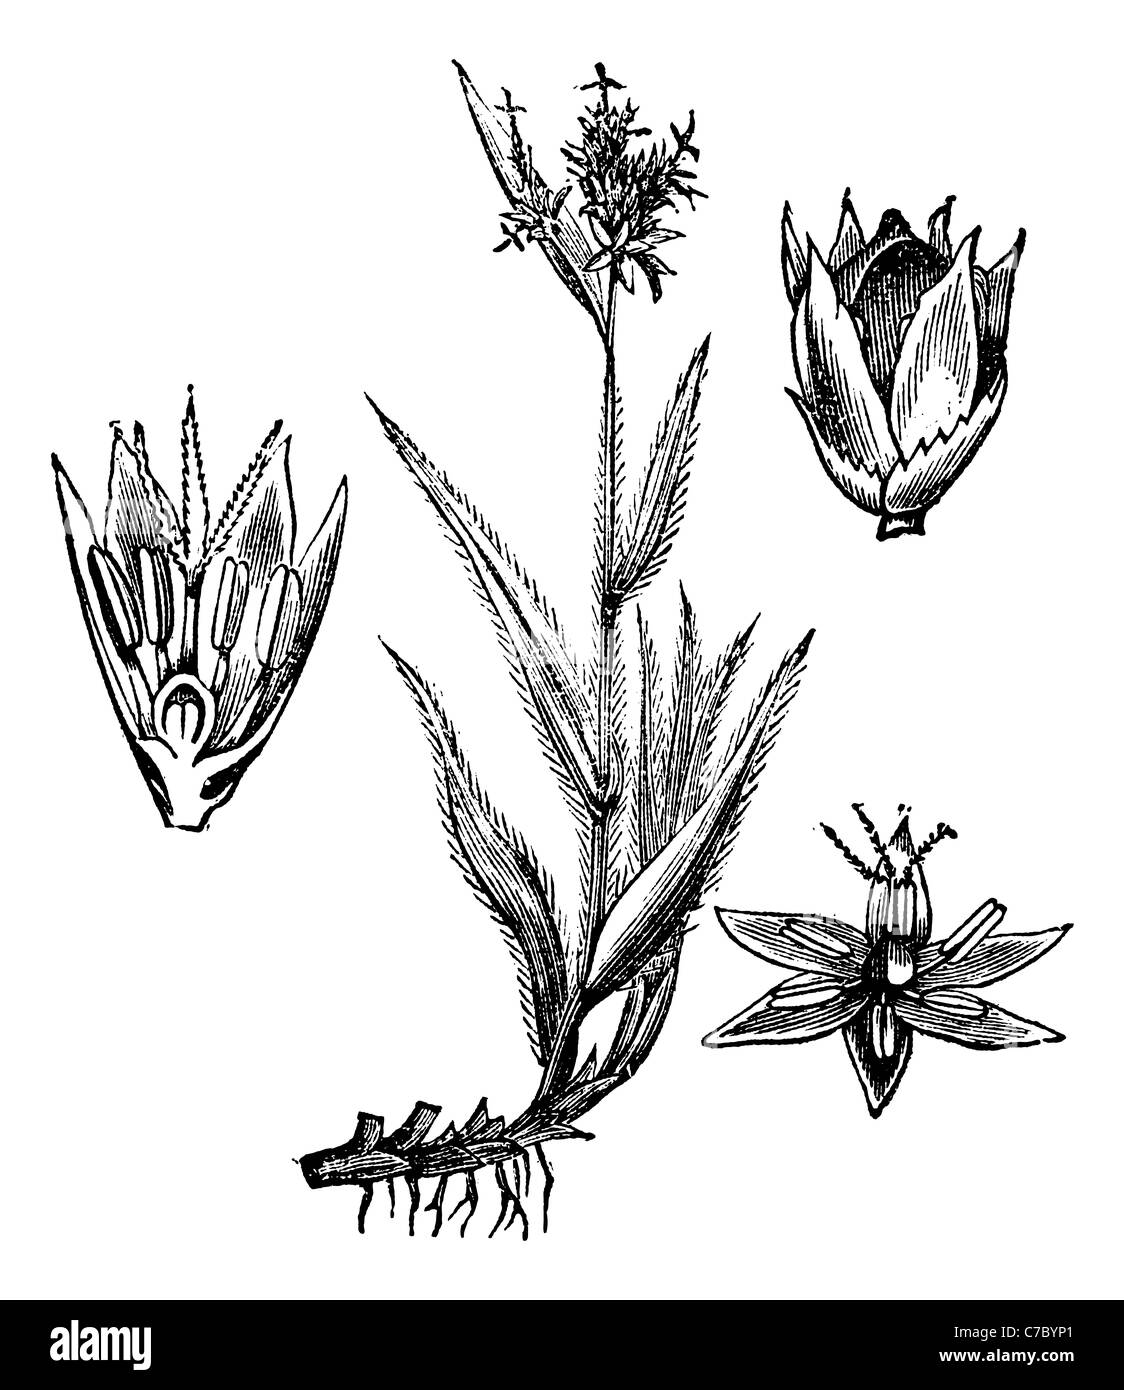 Field Wood-rush or Sweep's Brush, vintage engraving. Old engraved illustration of Field Wood-rush isolated on a white background Stock Photo